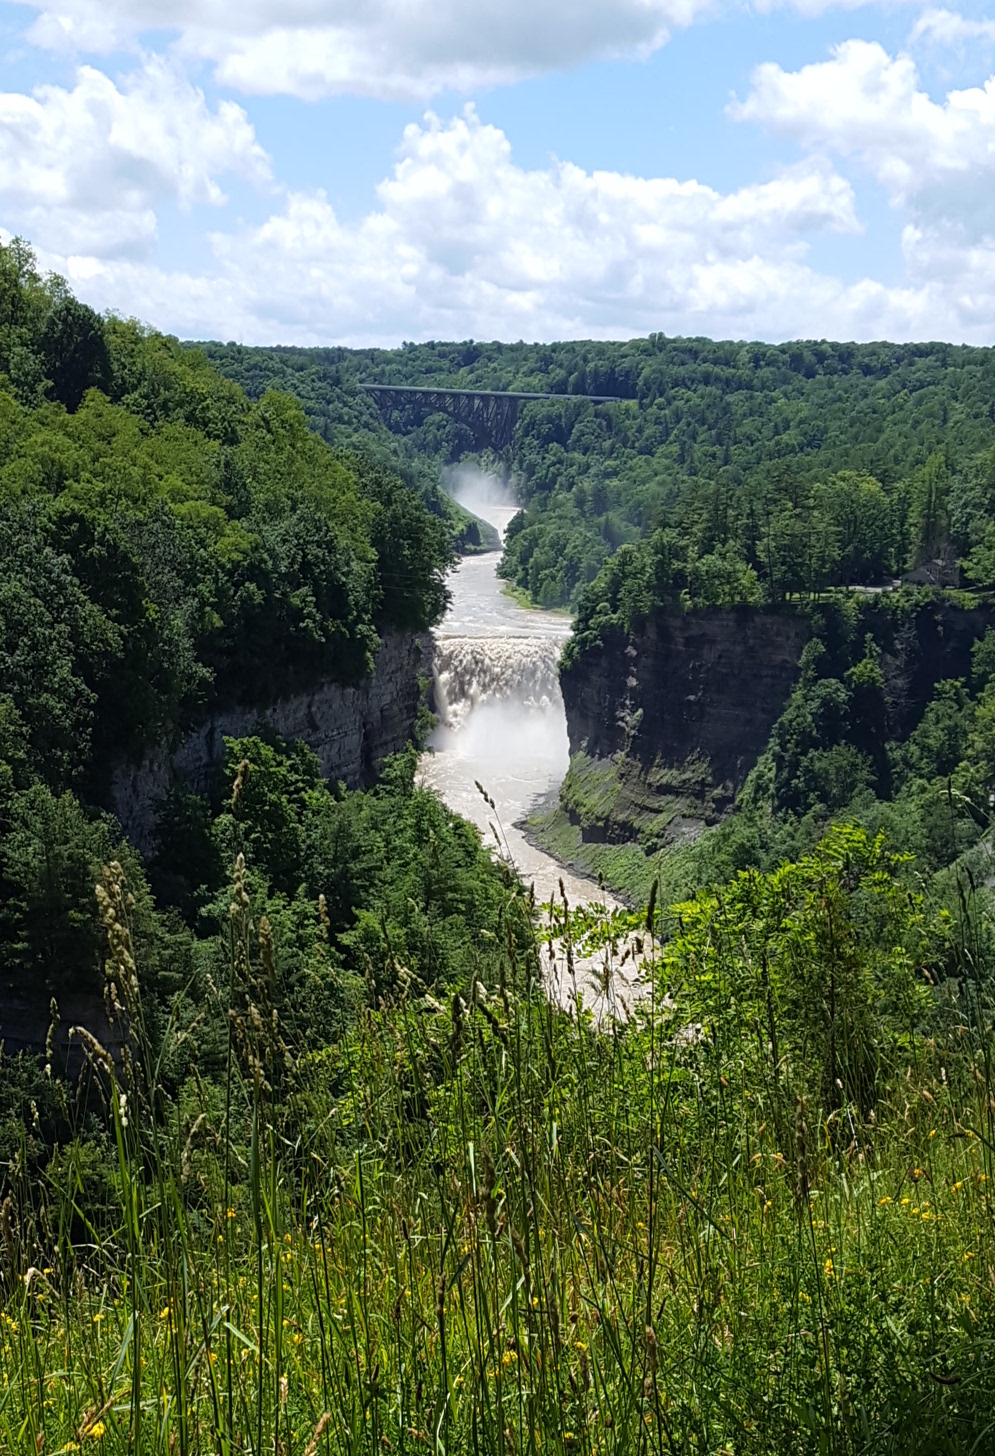 Inspiration Point at Letchworth State Park